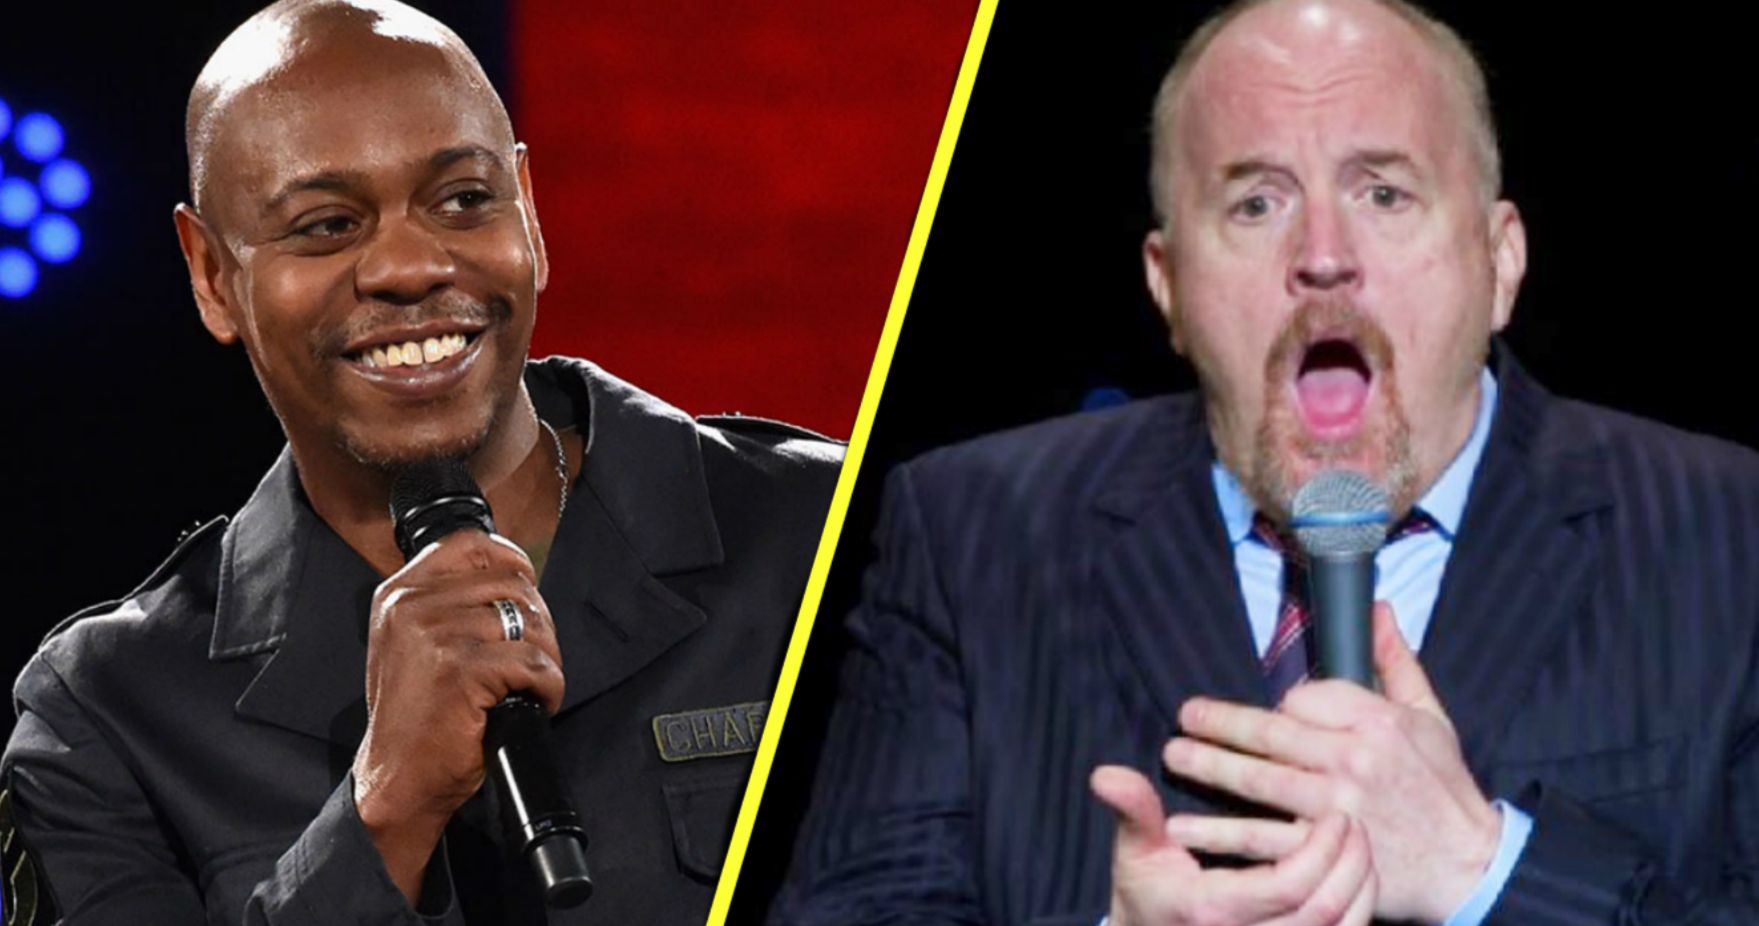 Louis C.K. Heckled Over Sexual Misconduct Allegations During Secret Dave Chappelle Comedy Show